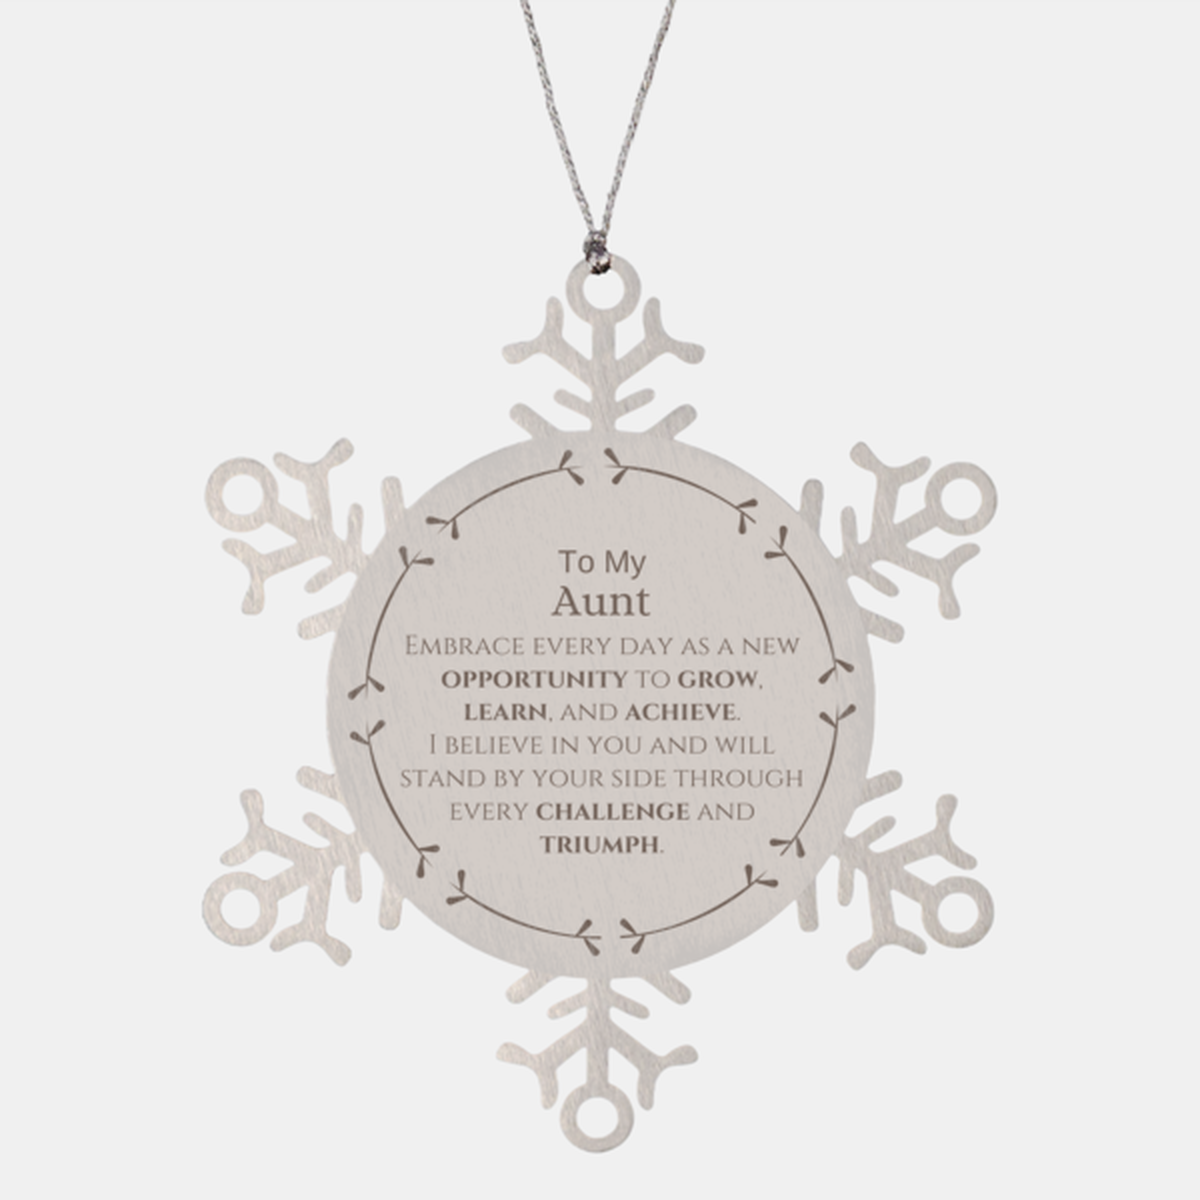 To My Aunt Gifts, I believe in you and will stand by your side, Inspirational Snowflake Ornament For Aunt, Birthday Christmas Motivational Aunt Gifts